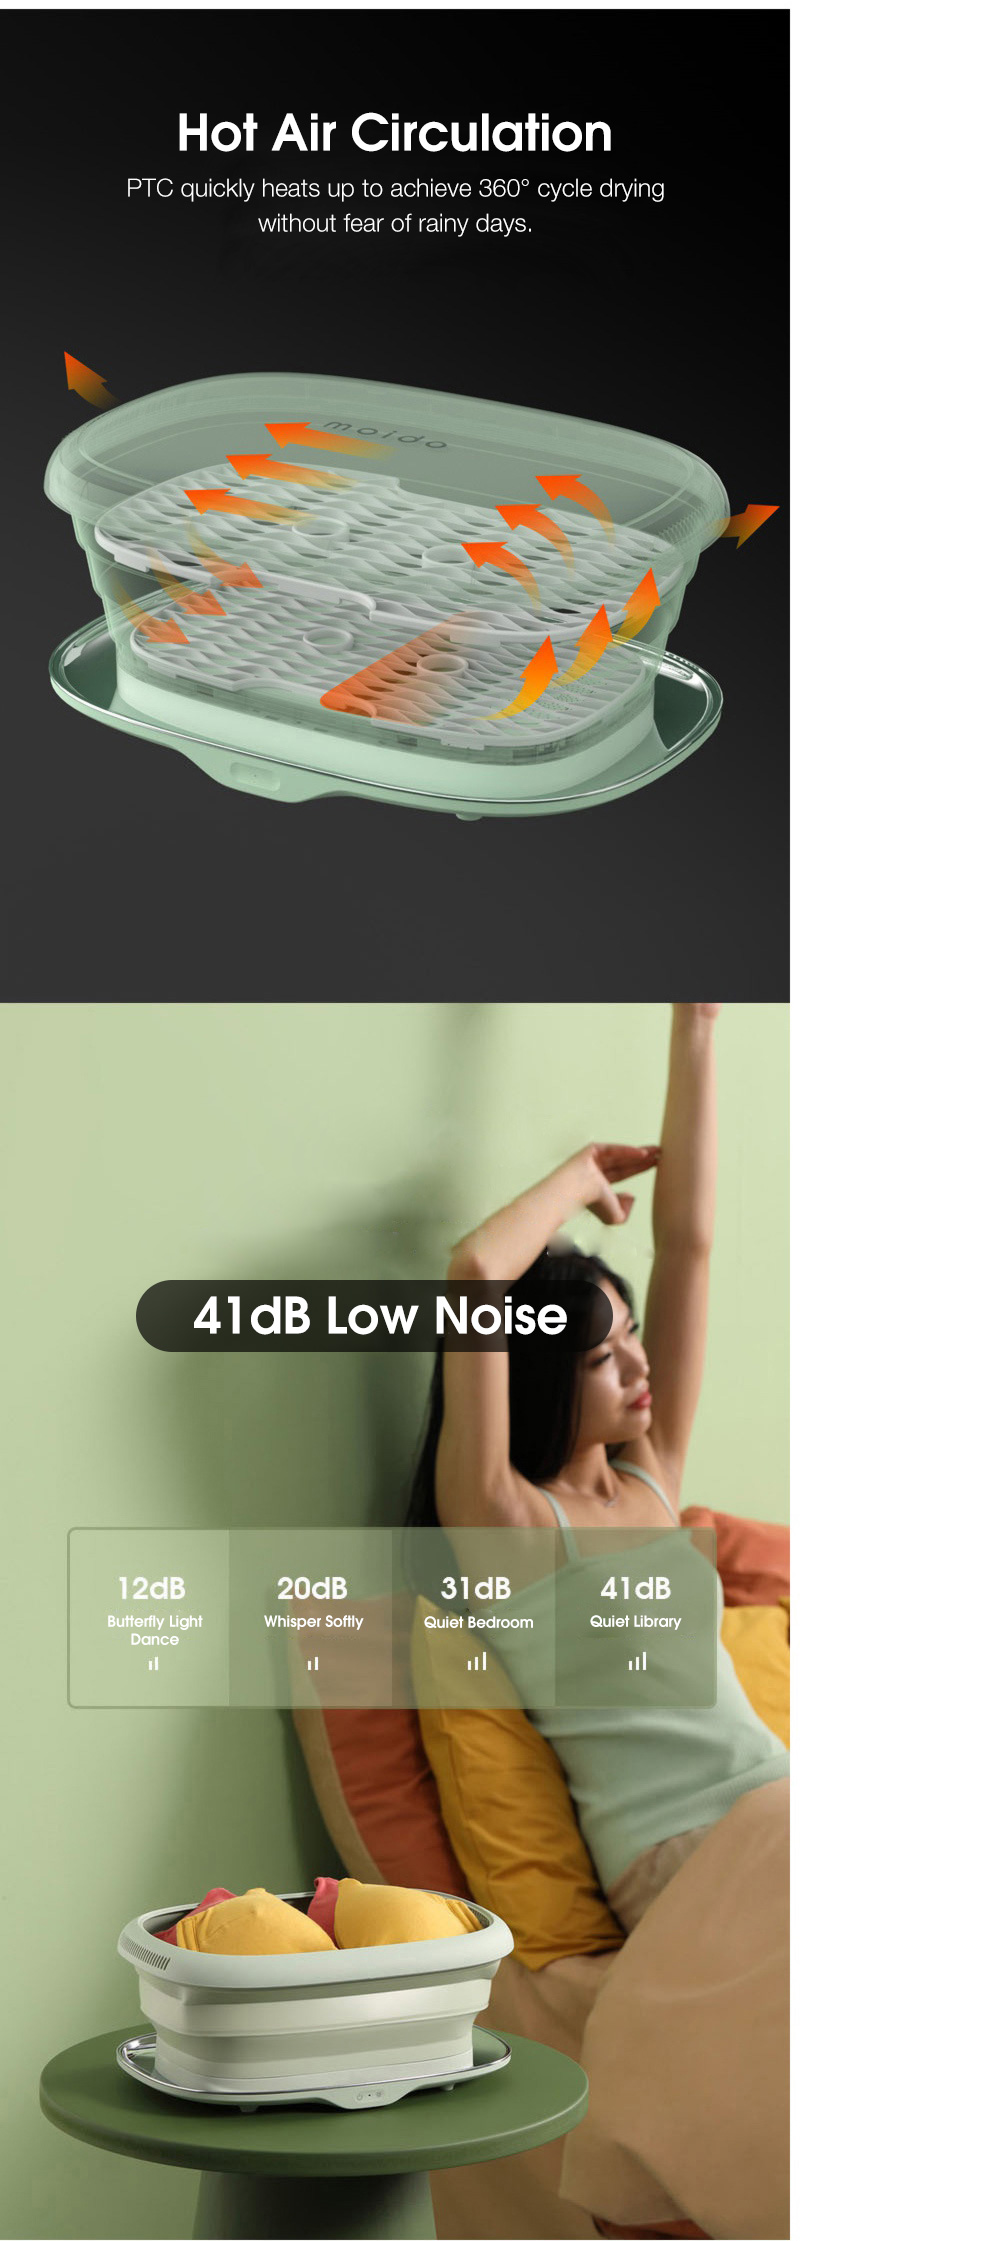 Moido-MO2-Mini-Folding-Clothes-Dryer-UV-Disinfection-Underwear-Panties-Travel-Household-Drying-Machi-1790781-3